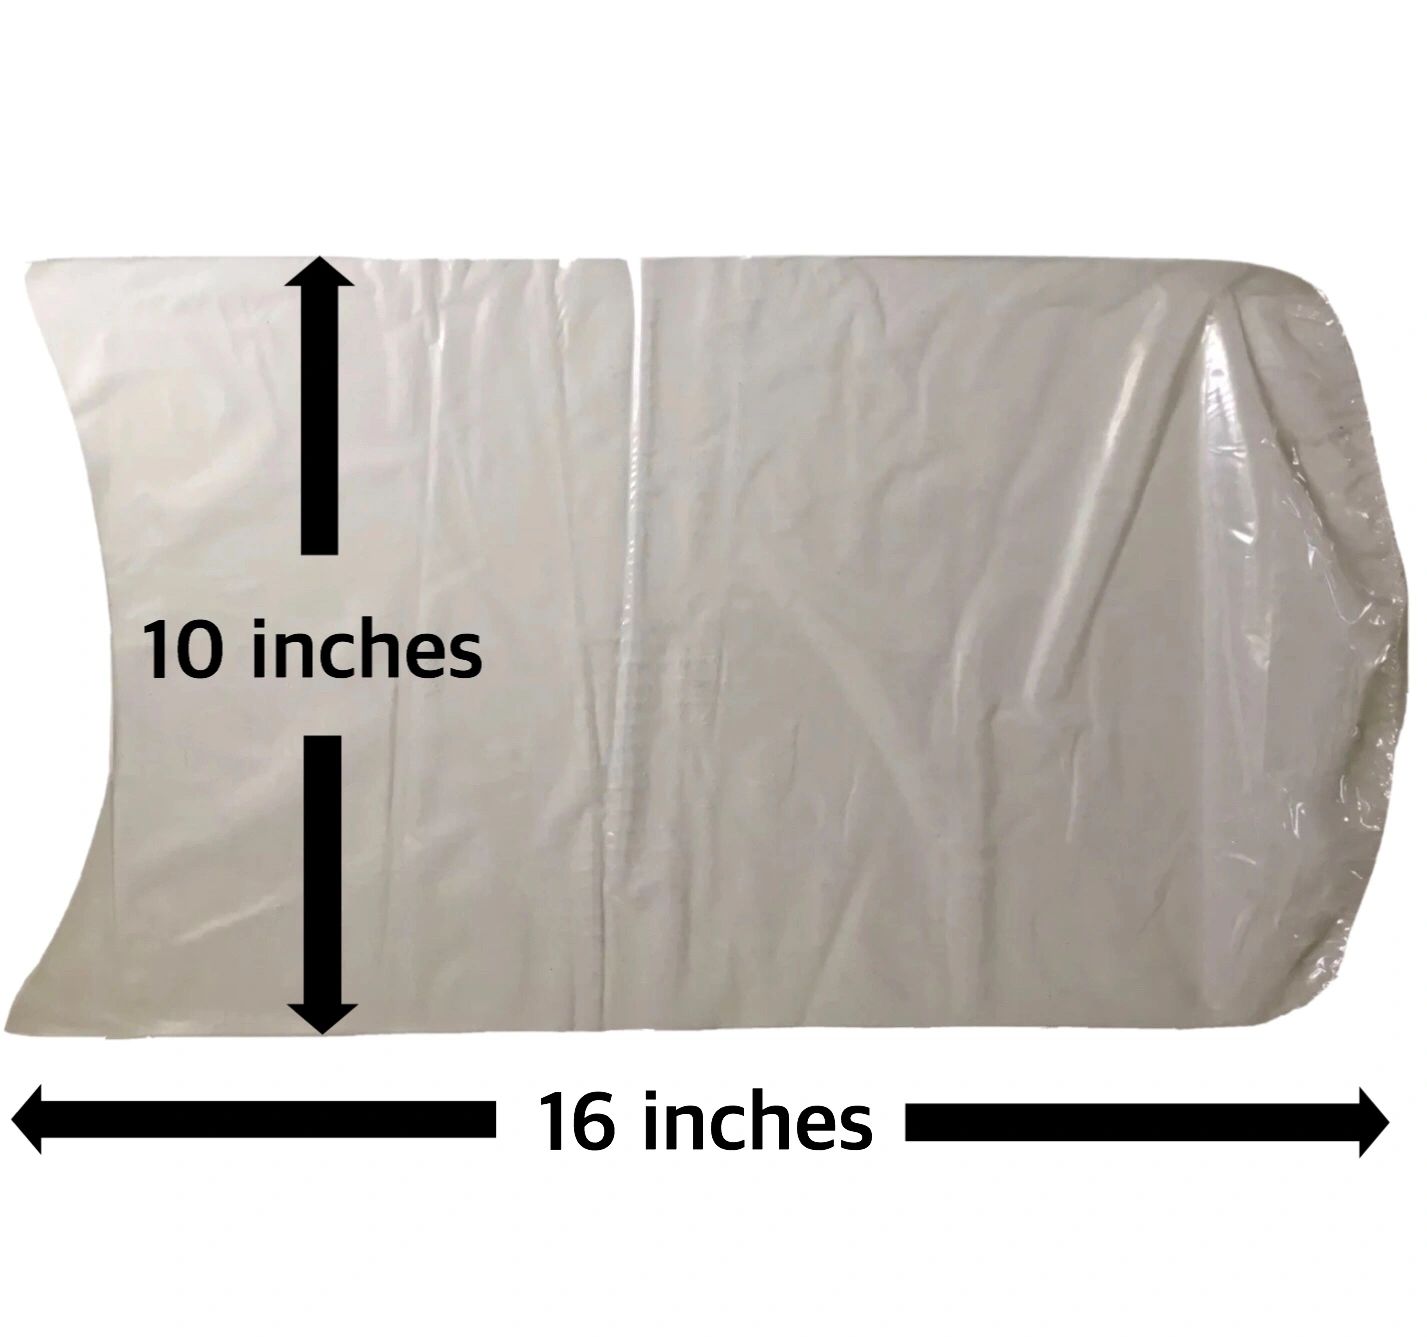 Poultry Shrink Bags-25 10" X 16" with ZipTies 